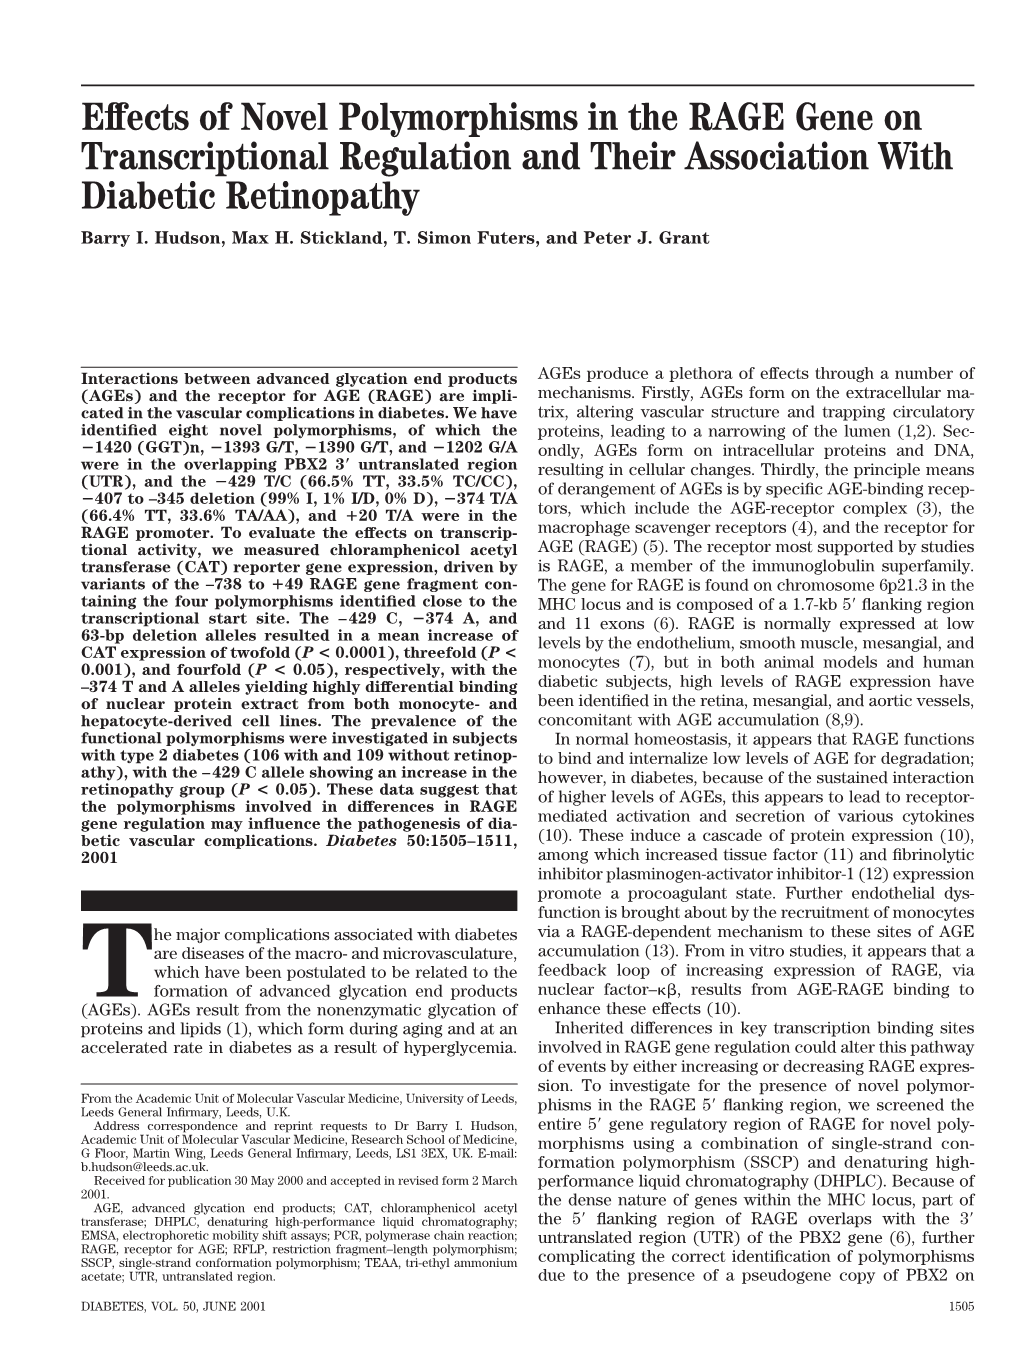 Effects of Novel Polymorphisms in the RAGE Gene on Transcriptional Regulation and Their Association with Diabetic Retinopathy Barry I